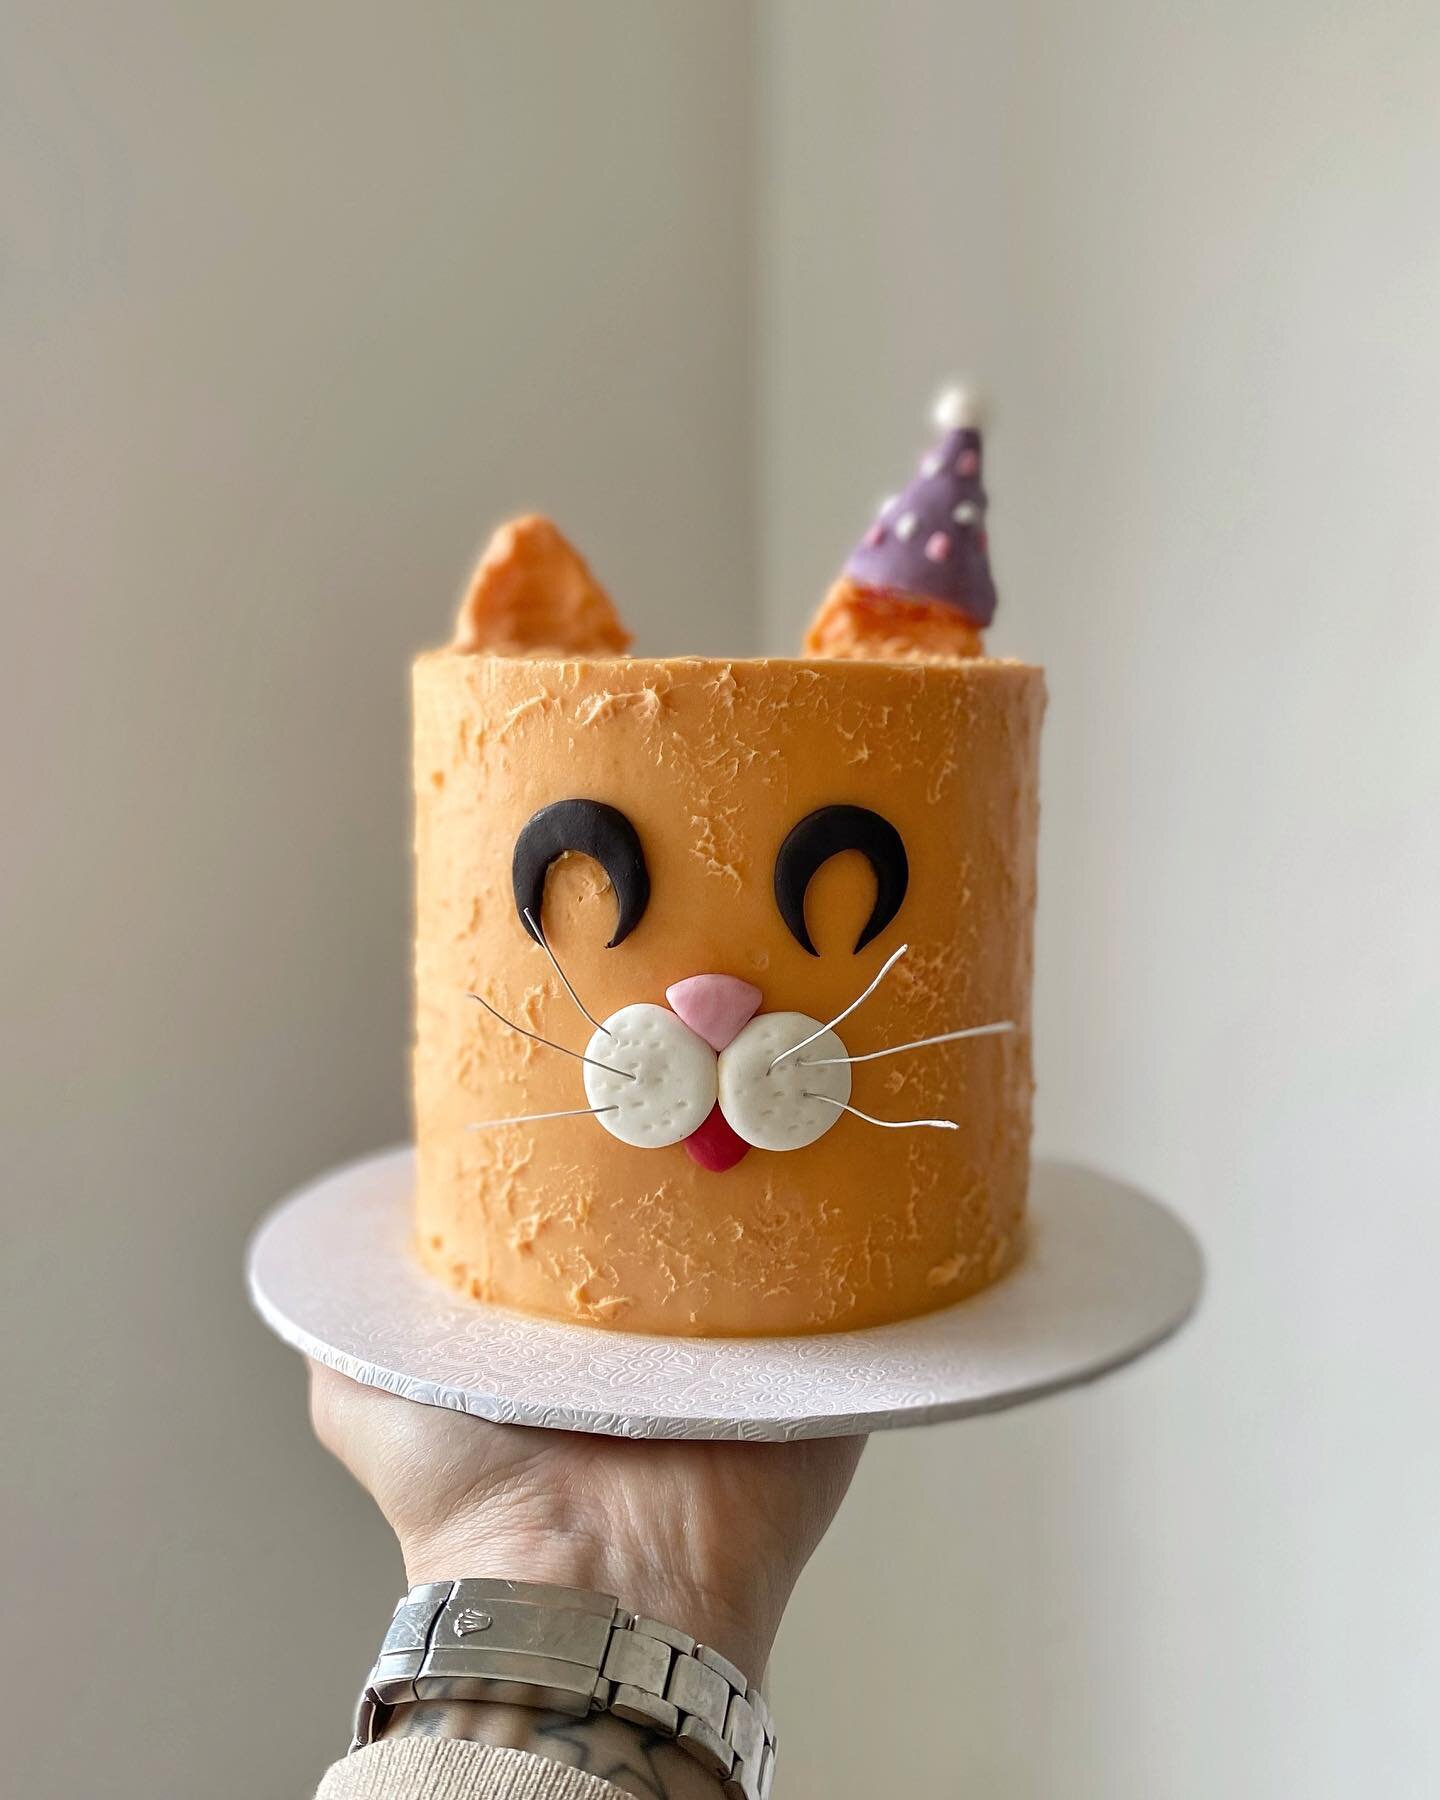 Cutie 🐱 cake from last week.
Inside was my &ldquo;snickers&rdquo; flavour... chocolate mud sponge, crunchy peanut butter buttercream and salted caramel sauce 🤤 
.
.
.
.
.
.
#catcake #gingercat #catstagram #cakedecorating #nottingham #nottinghamcake